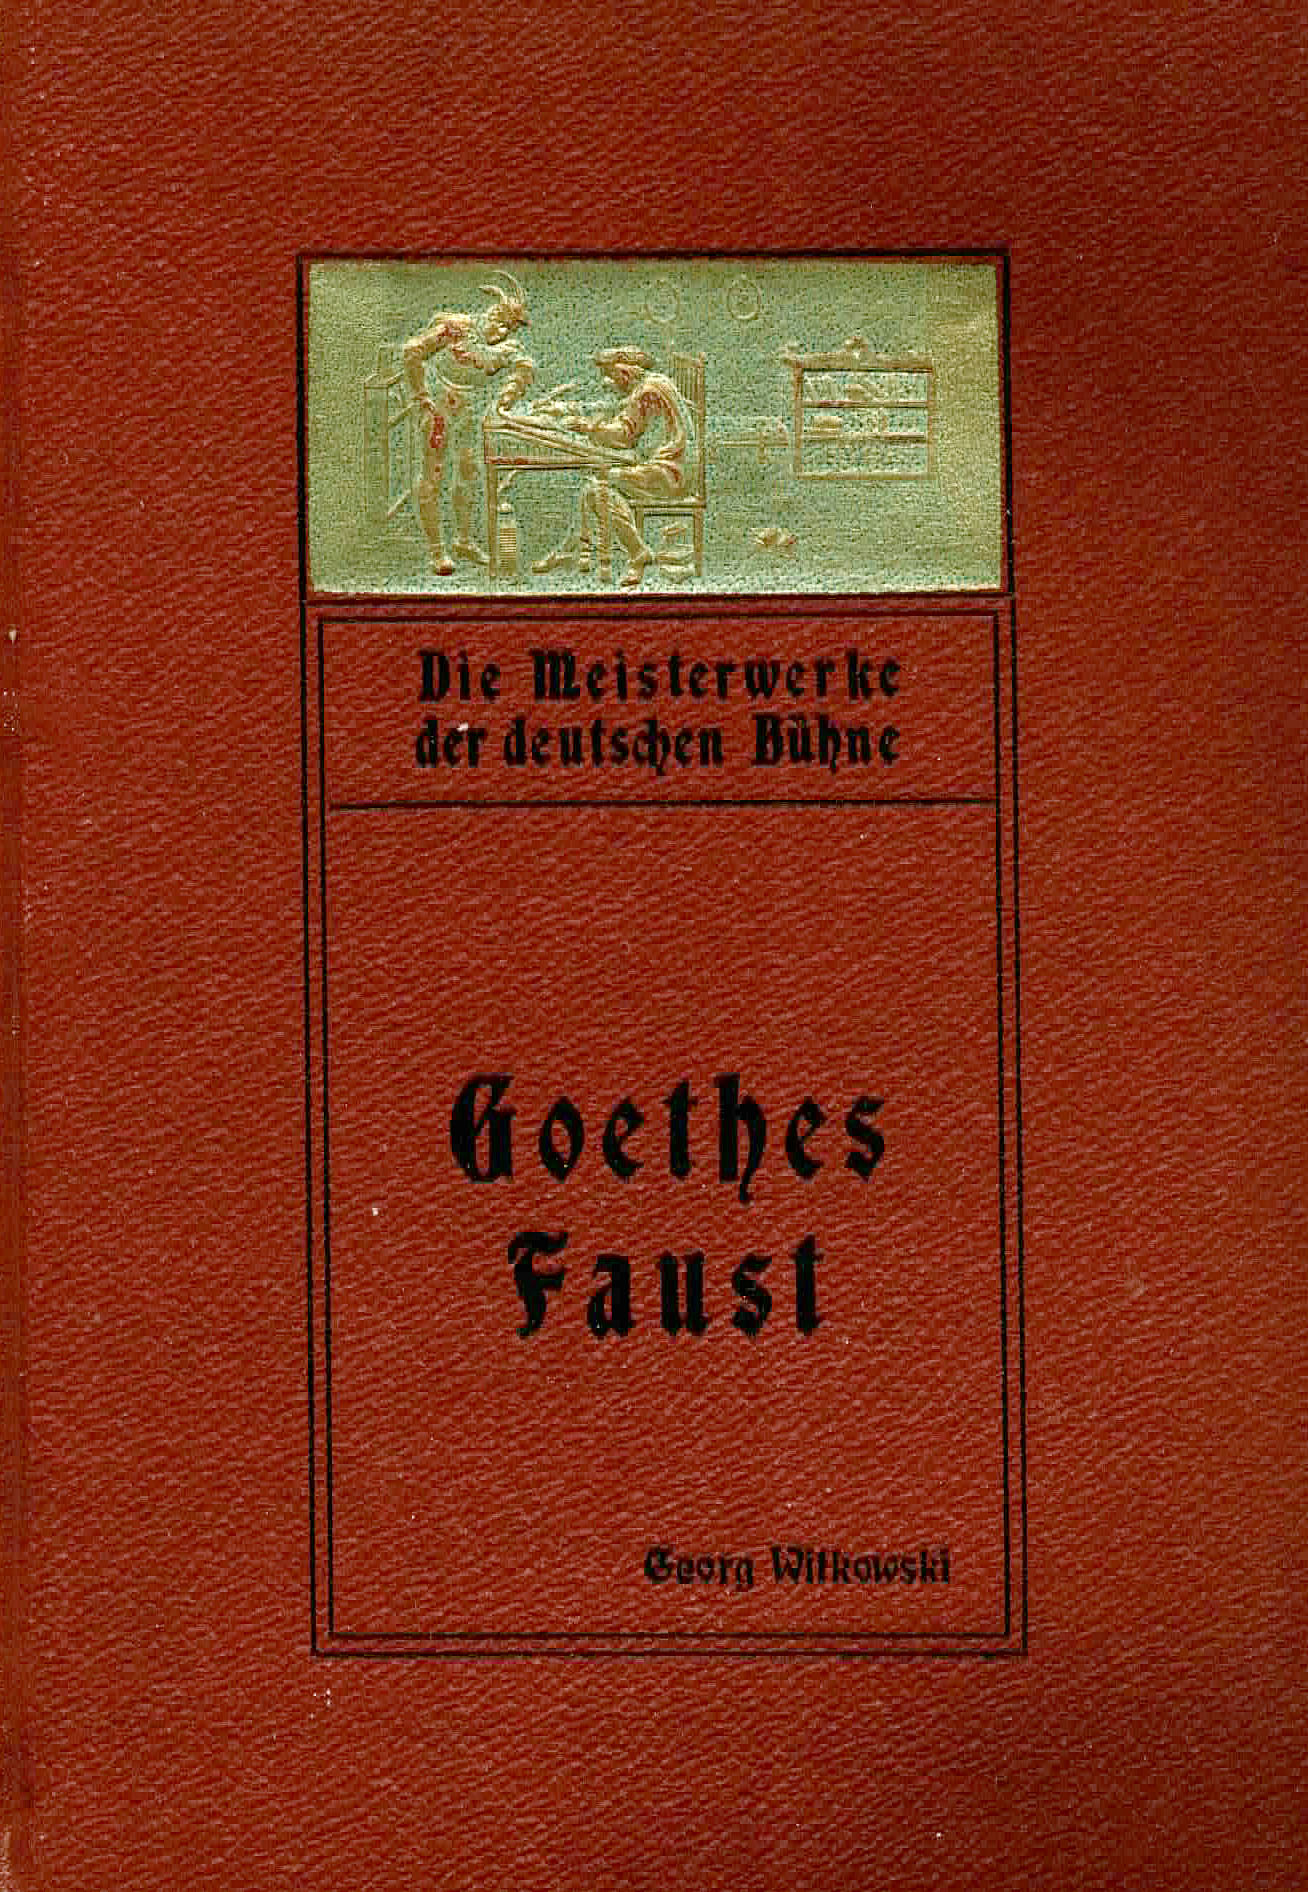 Goethes Faust - Witkowski, Georg